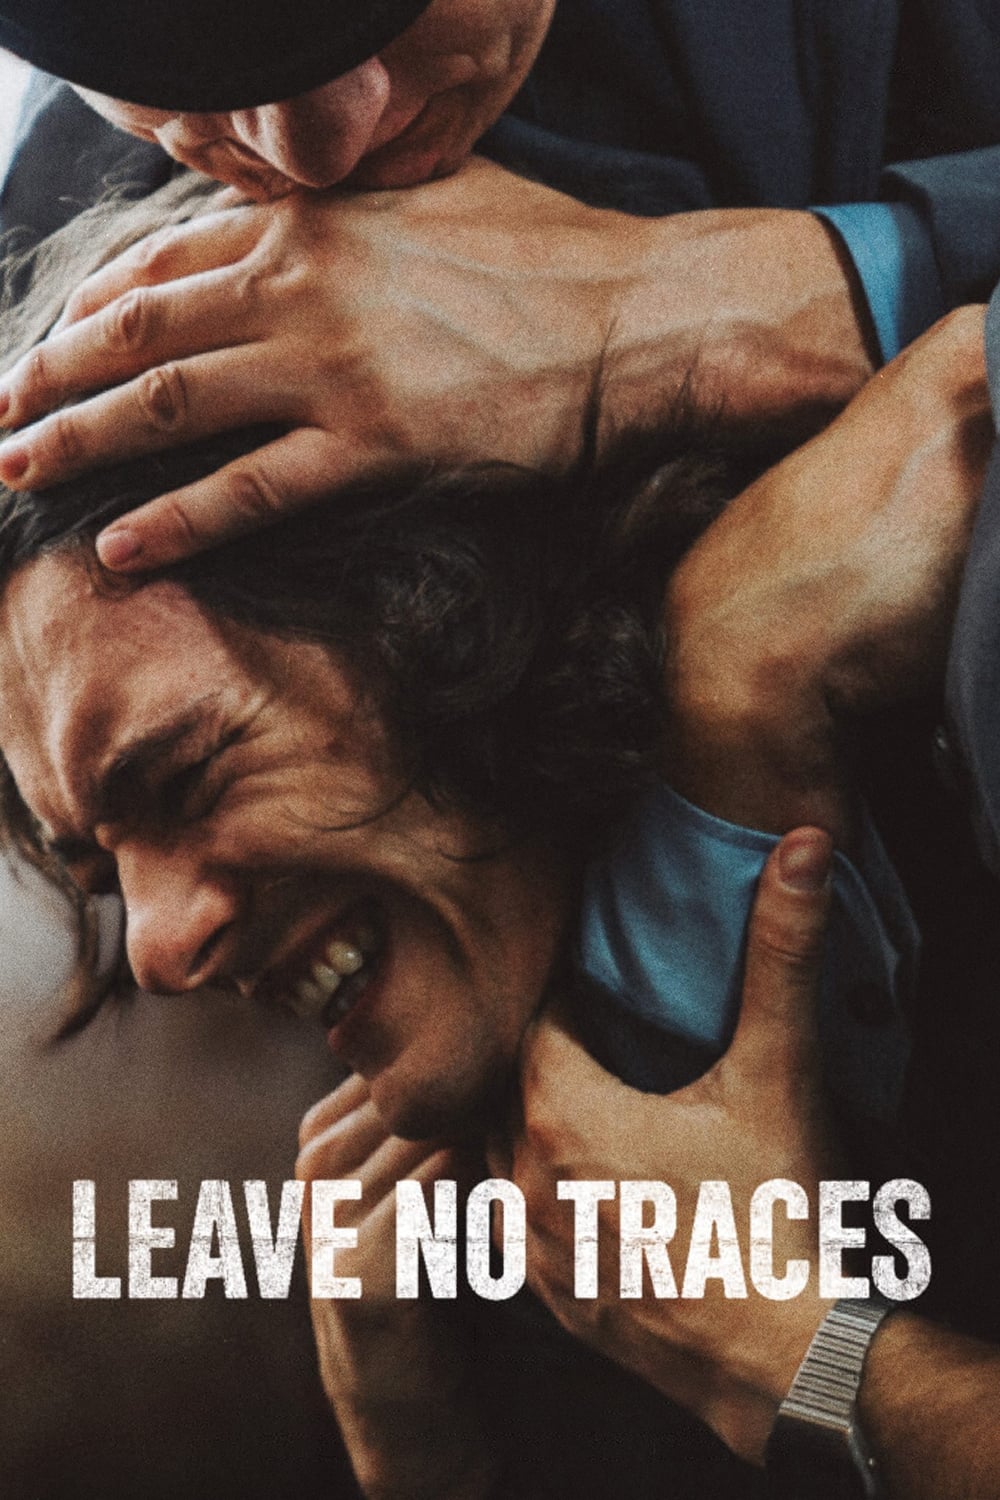 ZEBY NIE BYLO SLADOW (LEAVE NO TRACES)